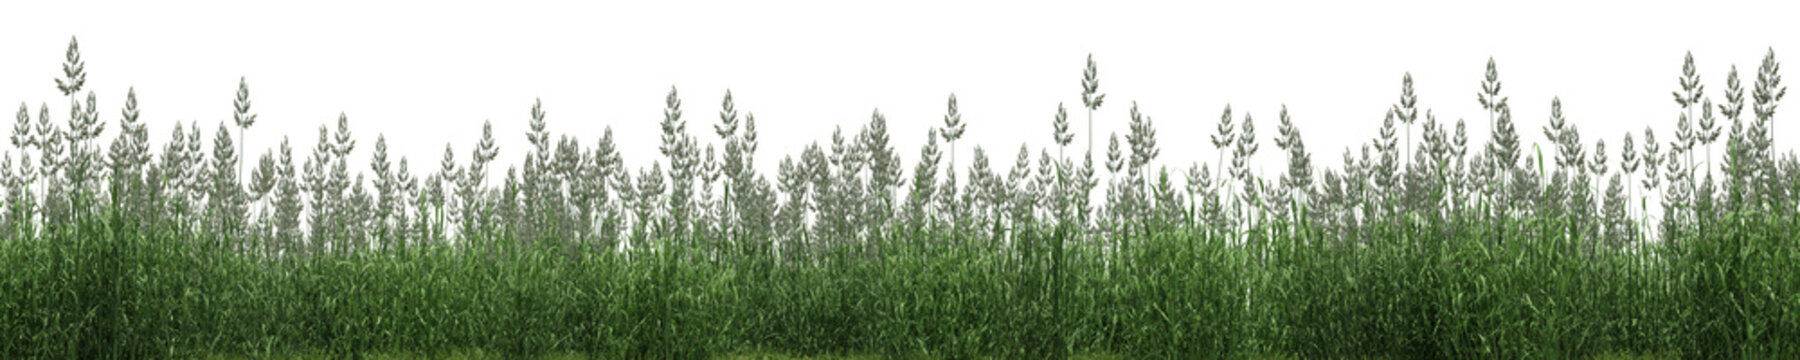 Phalaris arundinacea or Reed canary grass field in nature, meadow in springtime, Tropical forest isolated on transparent background - PNG file, 3D rendering illustration for create and design or etc